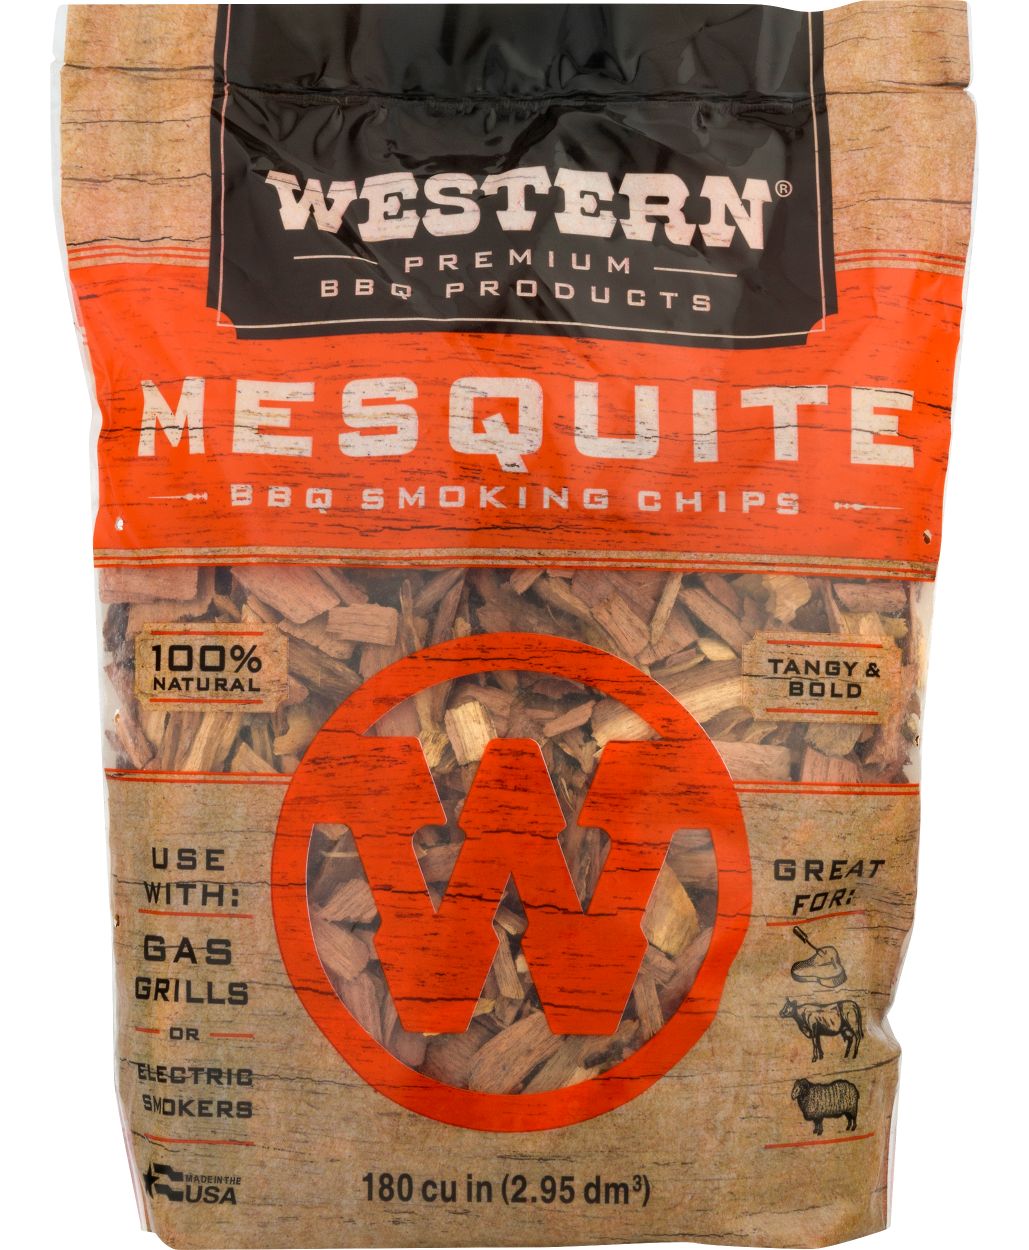 Western Premium BBQ Products Mesquite Smoking Chips, 180 Cu in - image 1 of 12